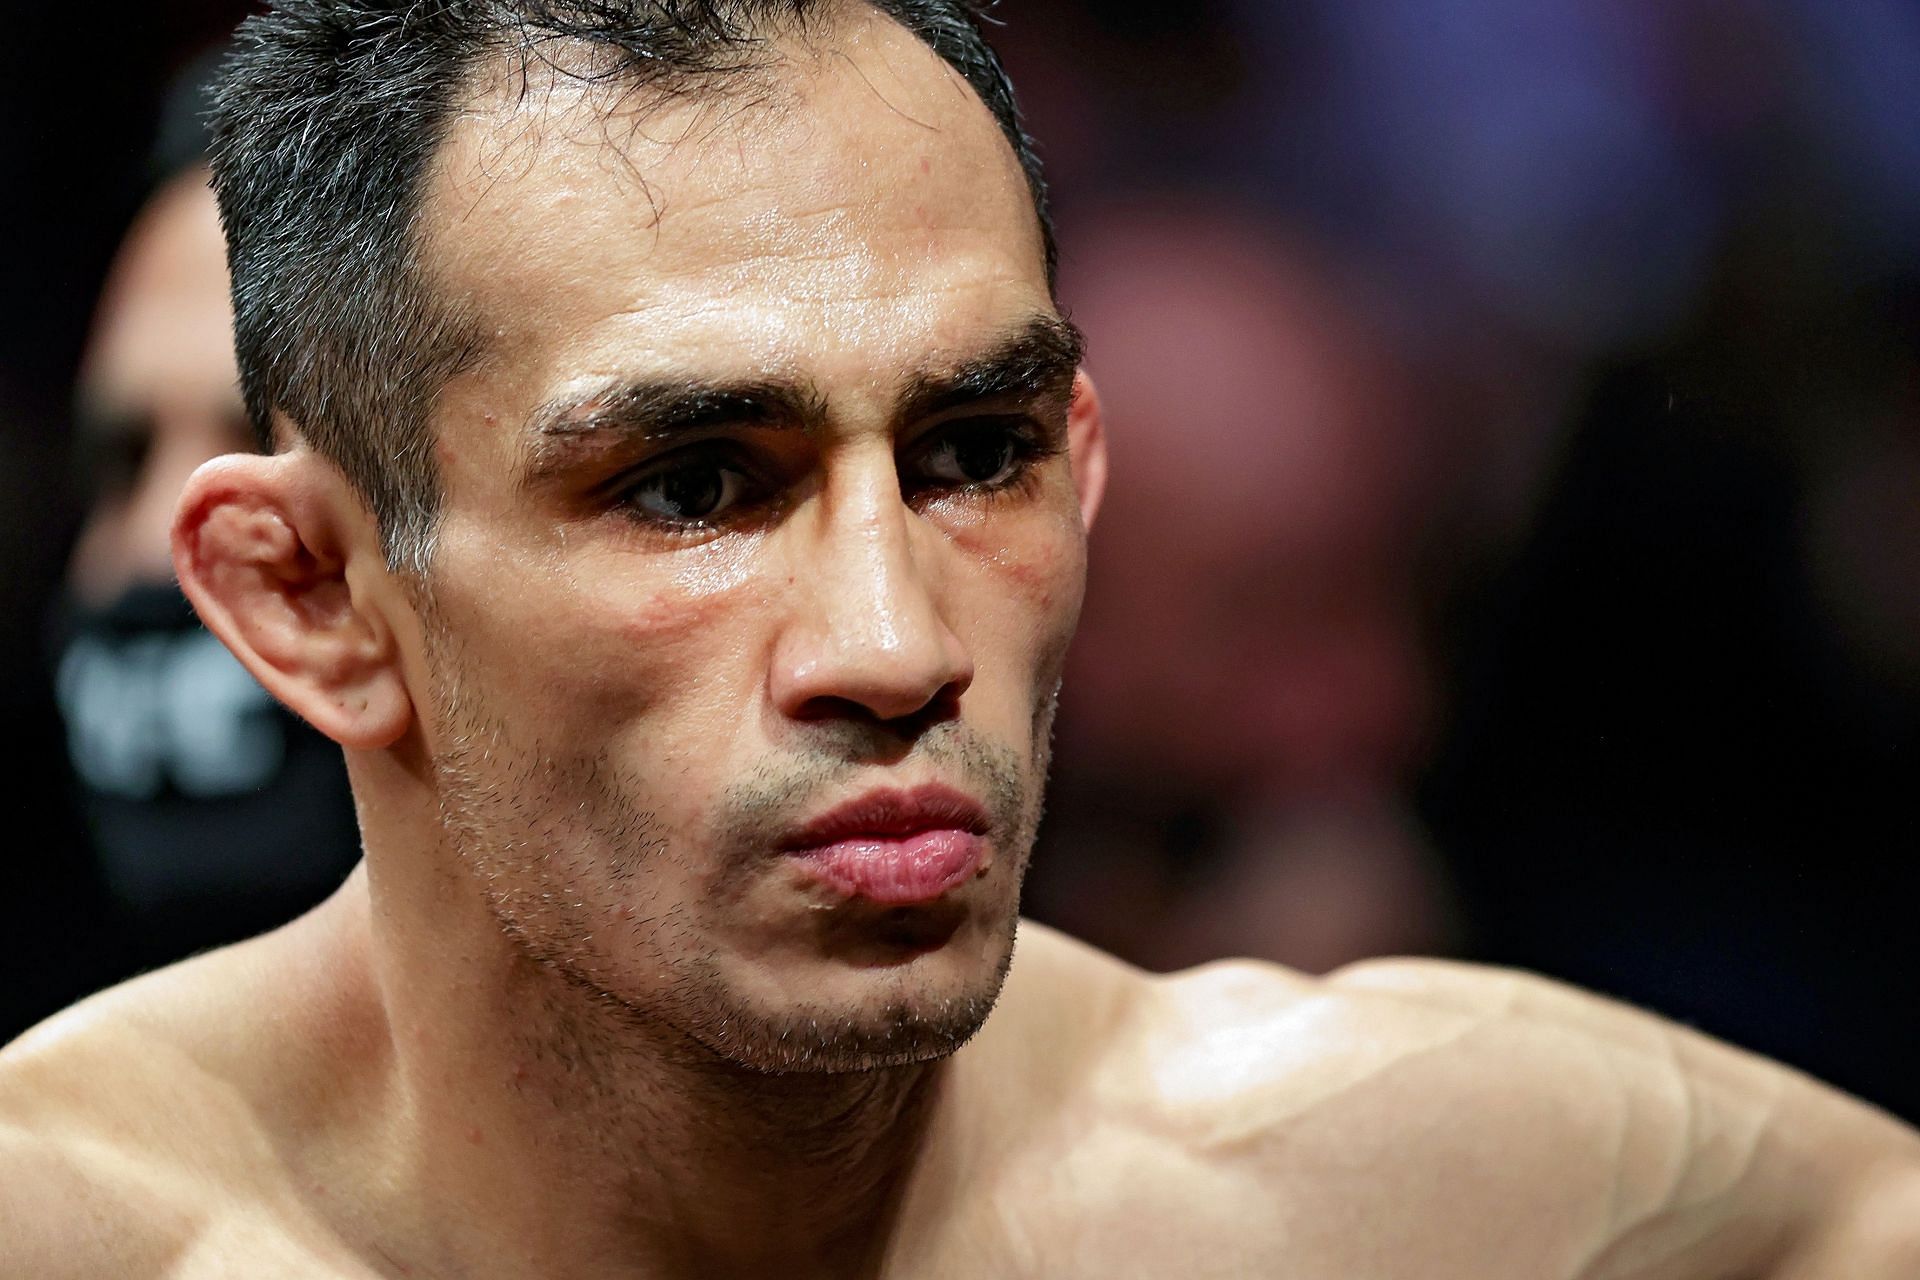 Tony Ferguson headlined UFC 279 after losing four fights in a row